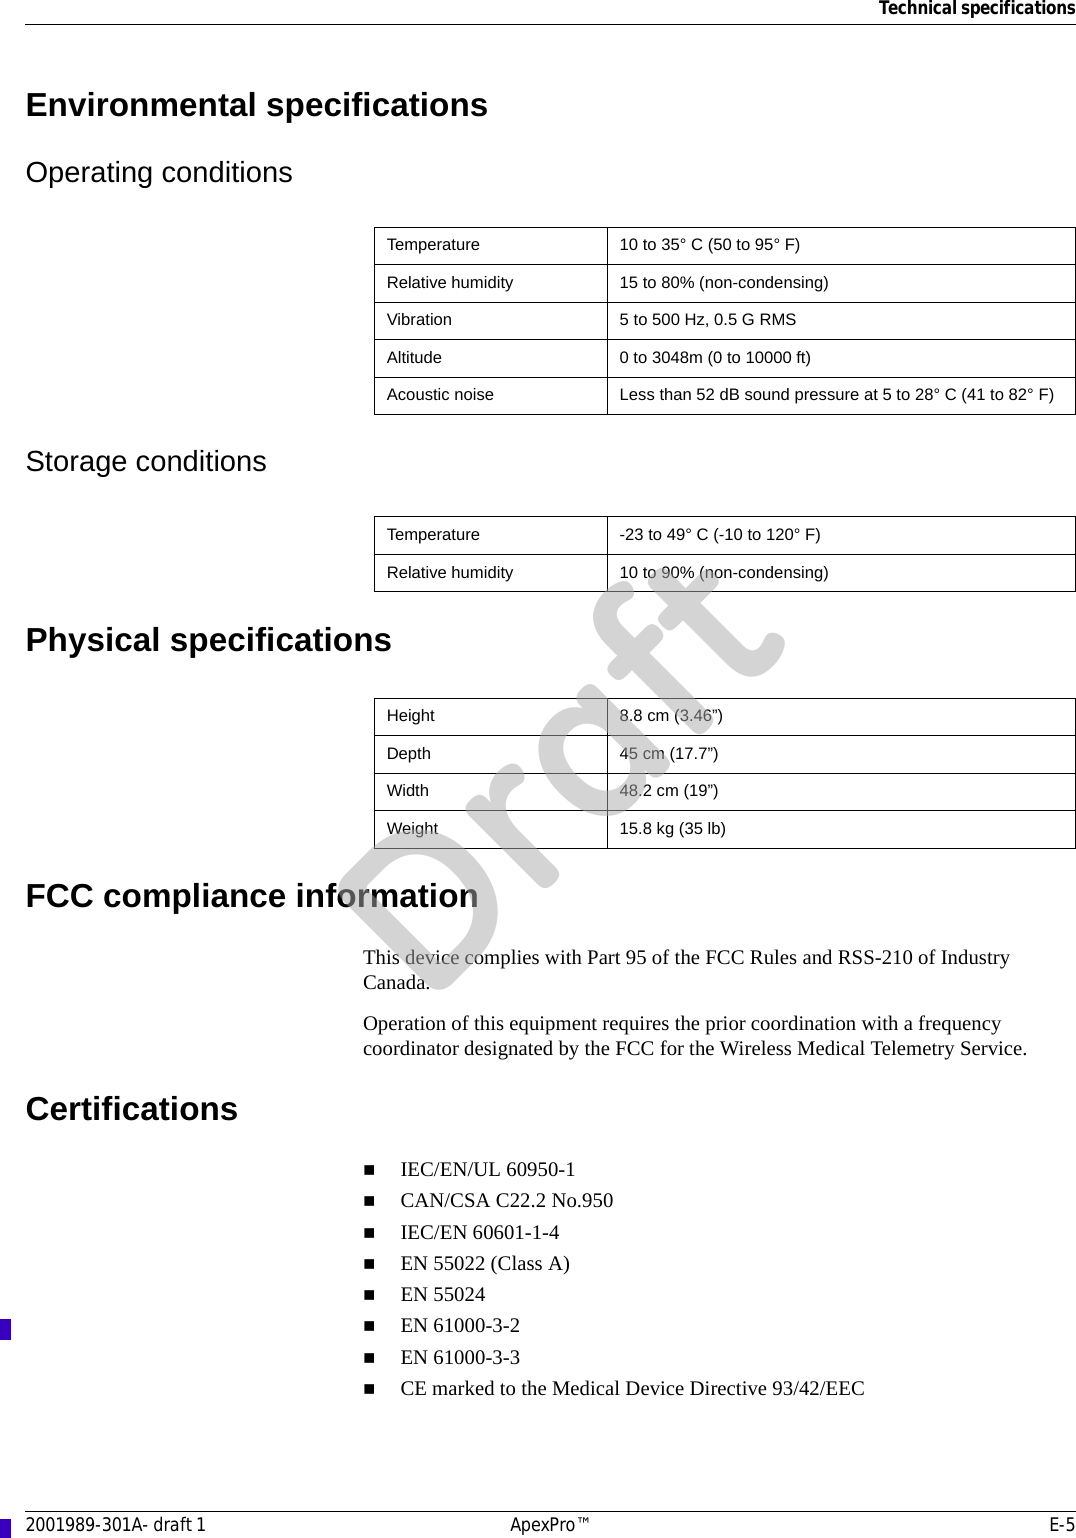 Technical specifications2001989-301A- draft 1 ApexPro™ E-5Environmental specificationsOperating conditionsStorage conditionsPhysical specificationsFCC compliance informationThis device complies with Part 95 of the FCC Rules and RSS-210 of Industry Canada. Operation of this equipment requires the prior coordination with a frequency coordinator designated by the FCC for the Wireless Medical Telemetry Service. CertificationsIEC/EN/UL 60950-1CAN/CSA C22.2 No.950IEC/EN 60601-1-4EN 55022 (Class A)EN 55024EN 61000-3-2EN 61000-3-3CE marked to the Medical Device Directive 93/42/EECTemperature 10 to 35° C (50 to 95° F)Relative humidity 15 to 80% (non-condensing)Vibration 5 to 500 Hz, 0.5 G RMSAltitude 0 to 3048m (0 to 10000 ft)Acoustic noise Less than 52 dB sound pressure at 5 to 28° C (41 to 82° F)Temperature -23 to 49° C (-10 to 120° F)Relative humidity 10 to 90% (non-condensing)Height 8.8 cm (3.46”)Depth 45 cm (17.7”)Width 48.2 cm (19”)Weight 15.8 kg (35 lb)Draft